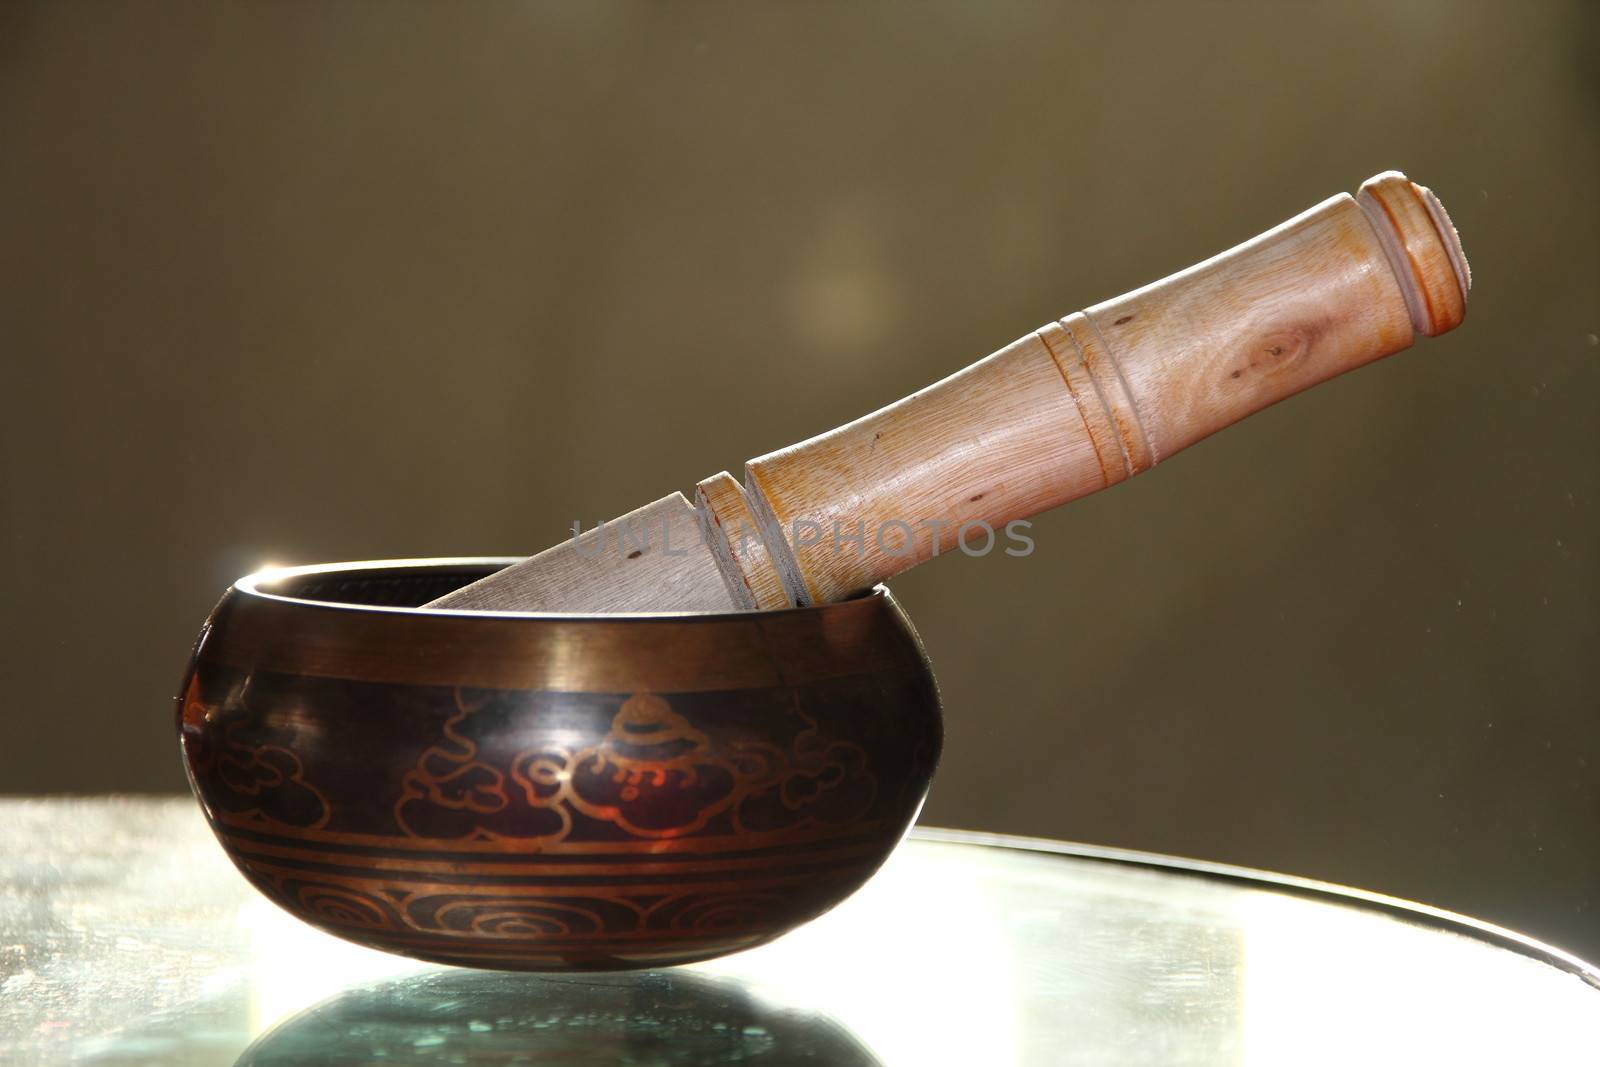 Tibetan singing bowl with a wooden stick